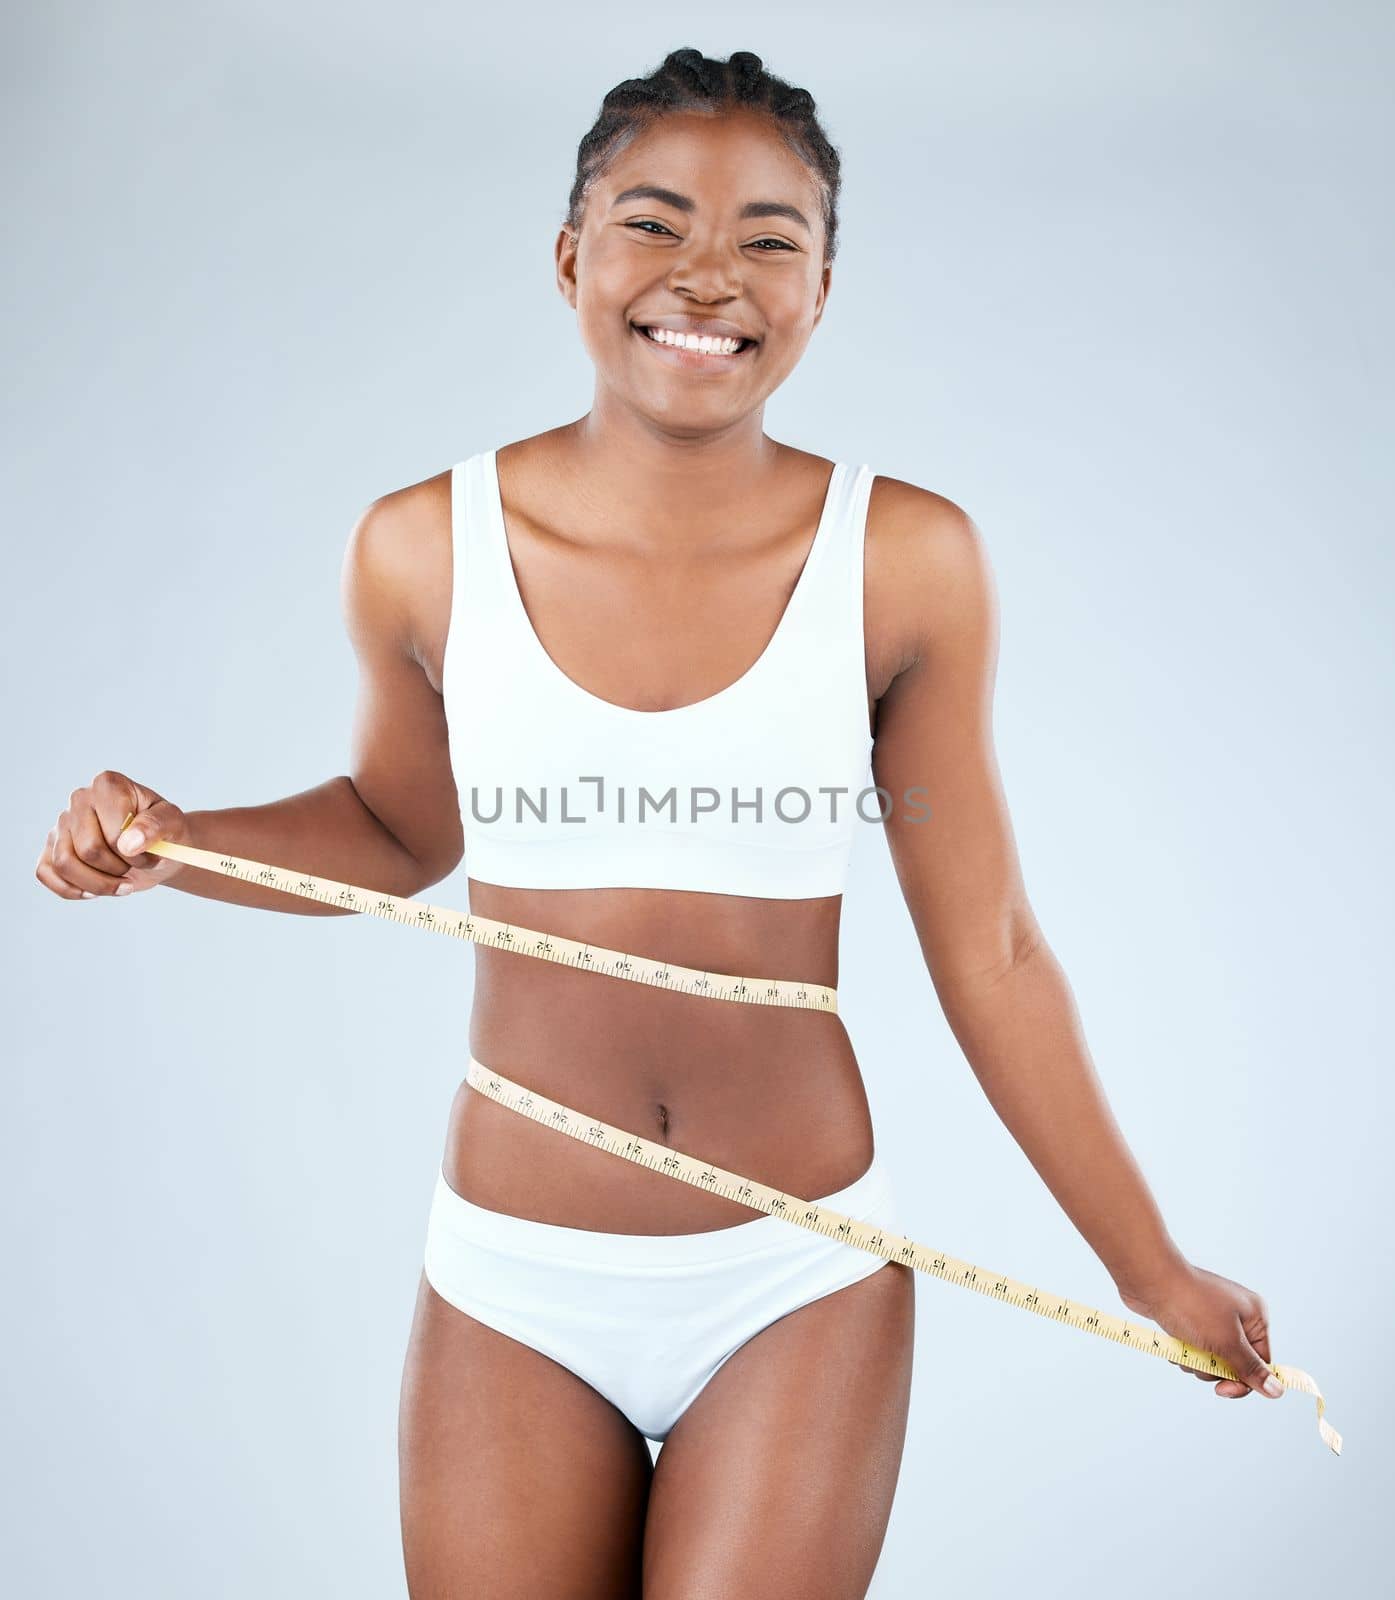 When you take care of your body, it shows. Studio shot of a fit young woman measuring her waist